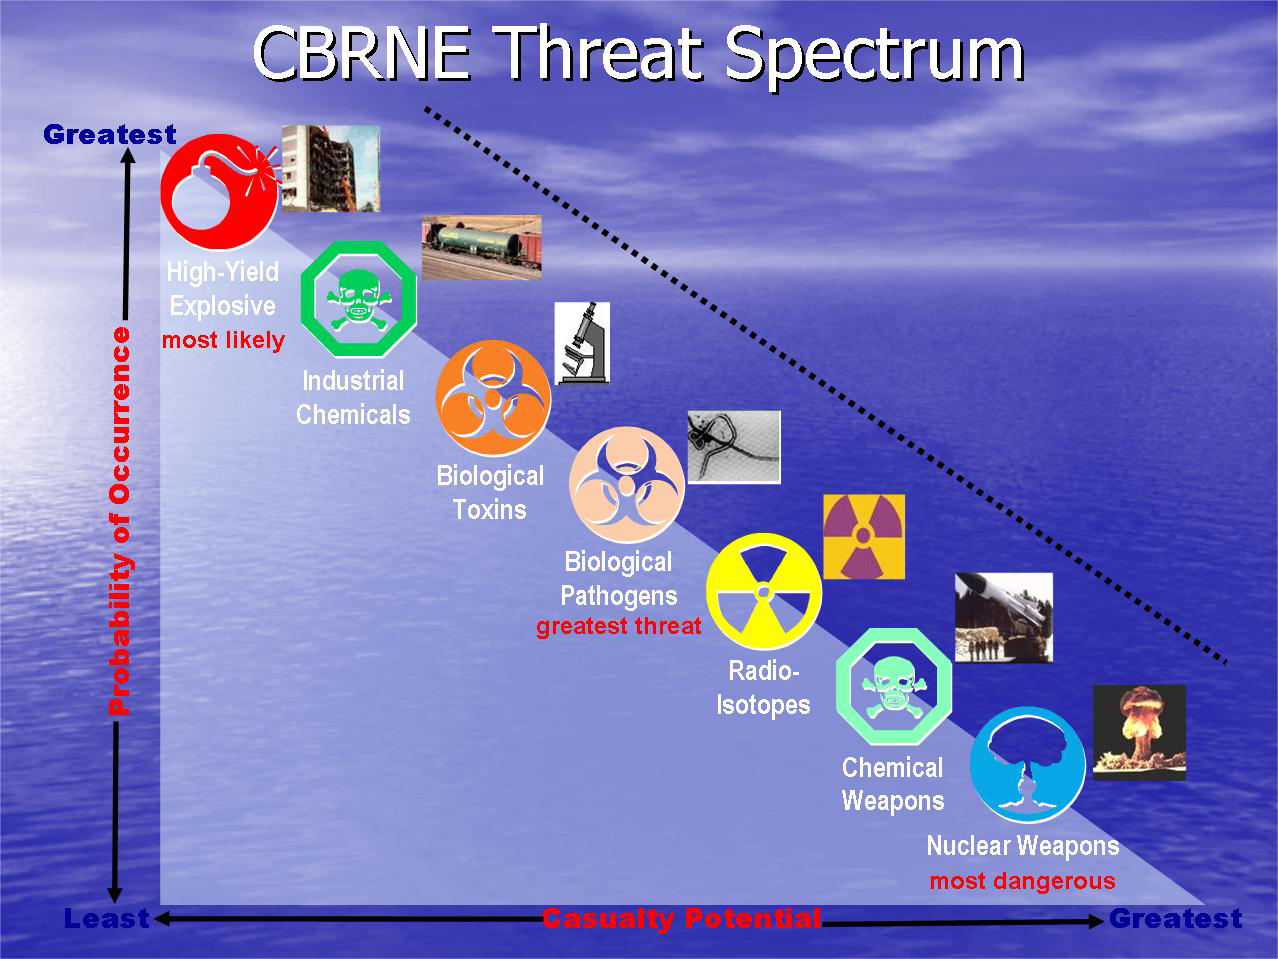 Chemical, Biological, Radiological, Nuclear and Explosives (CBRNE) threat spectrum | [Source: Homeland Security Digital Library | hsdl.org]